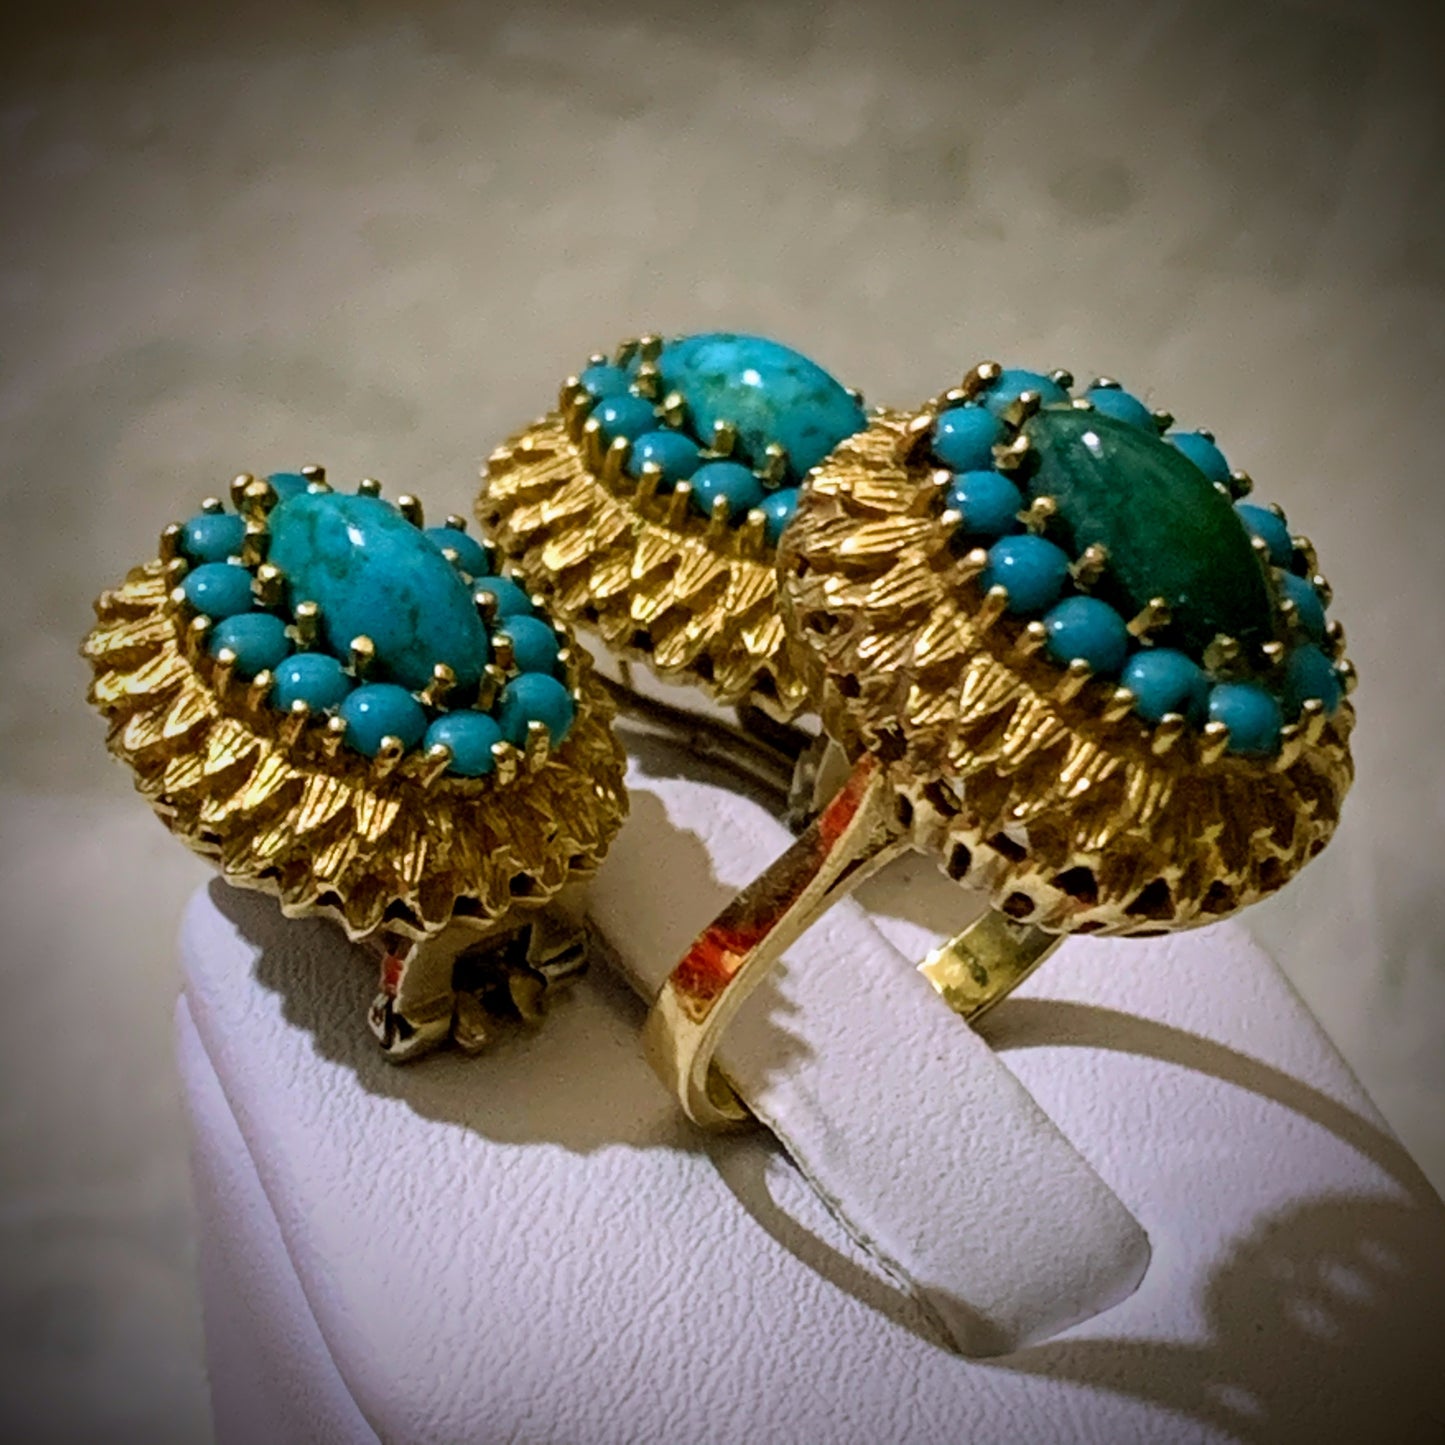 Vintage turquoise earring and ring in 18 kt setting